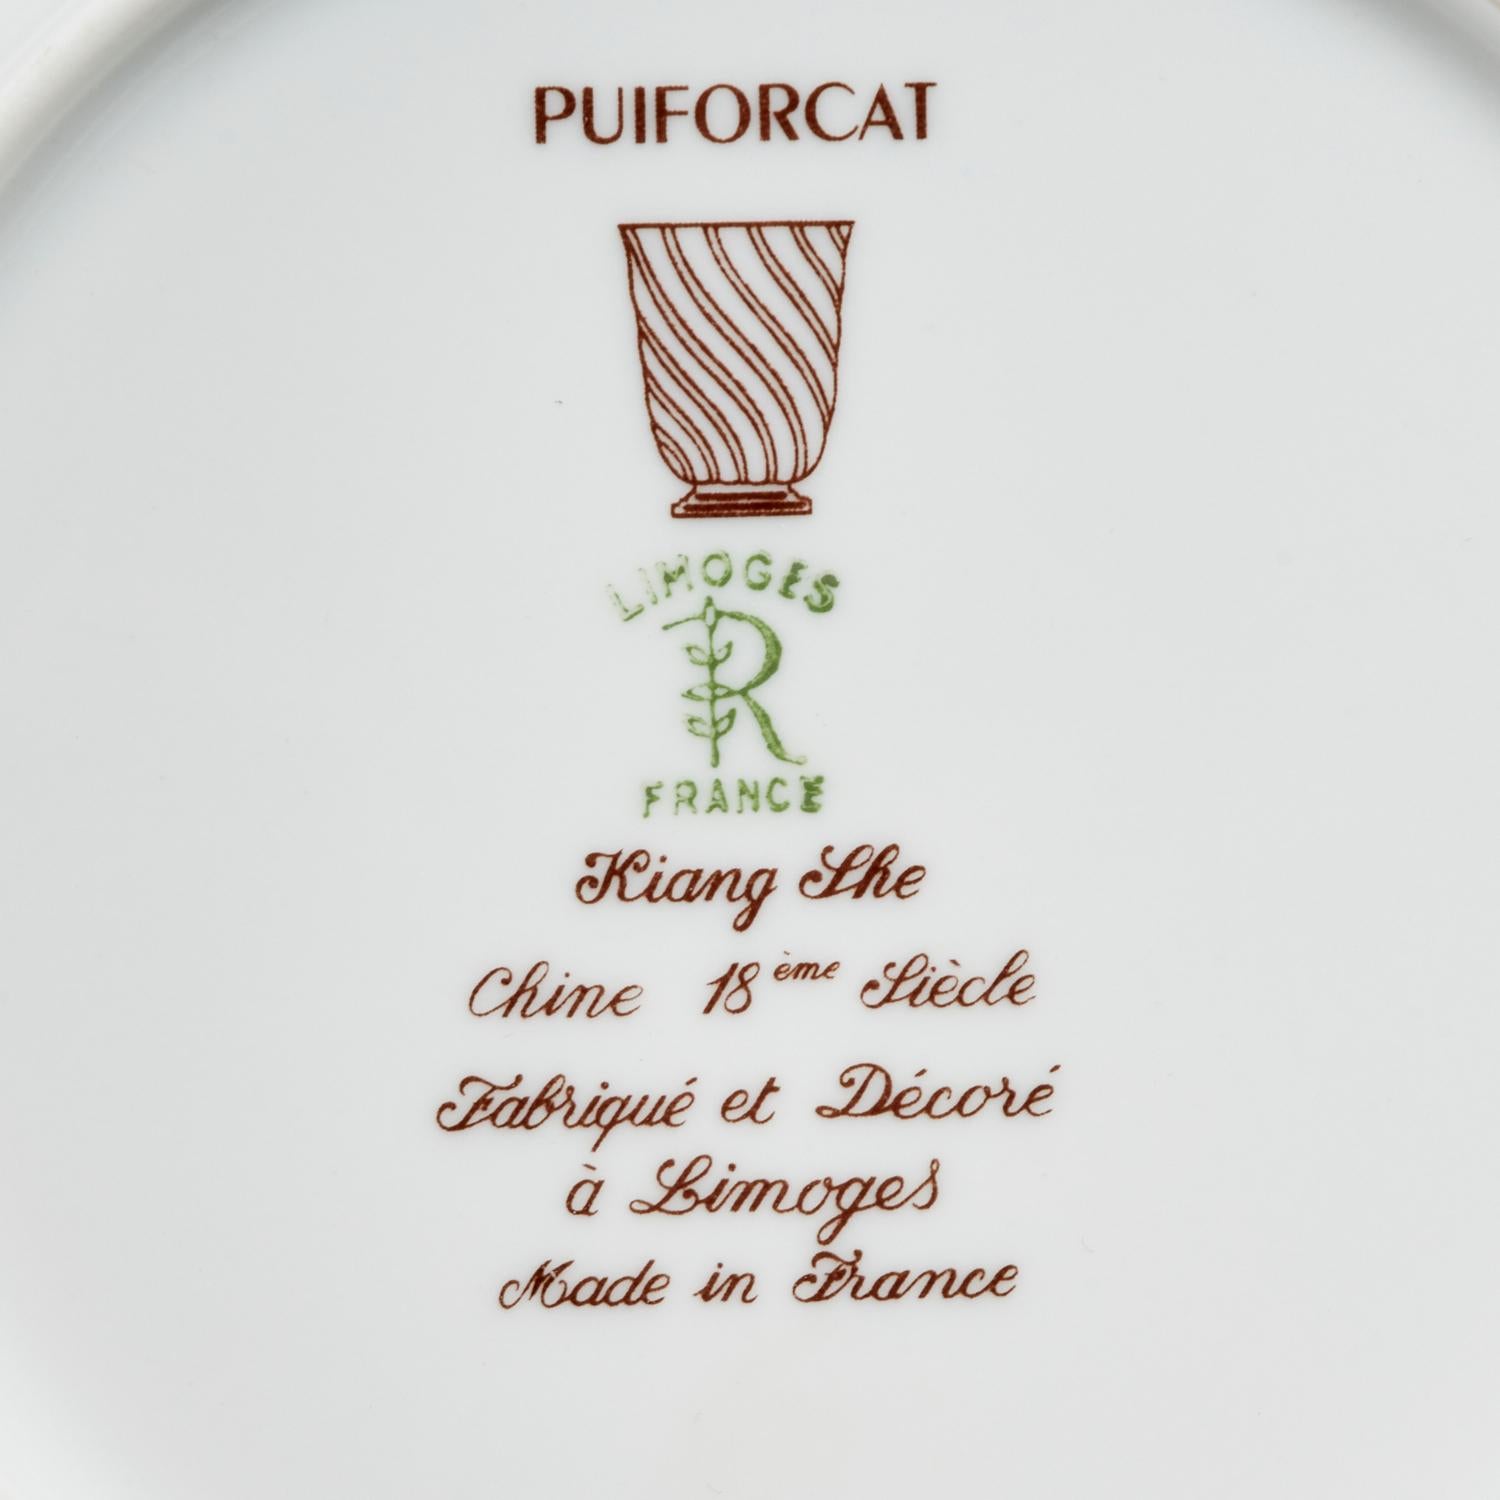 133 Piece House of Puiforcat Kiang She Dinner Service for 12 by Limoges, France For Sale 5